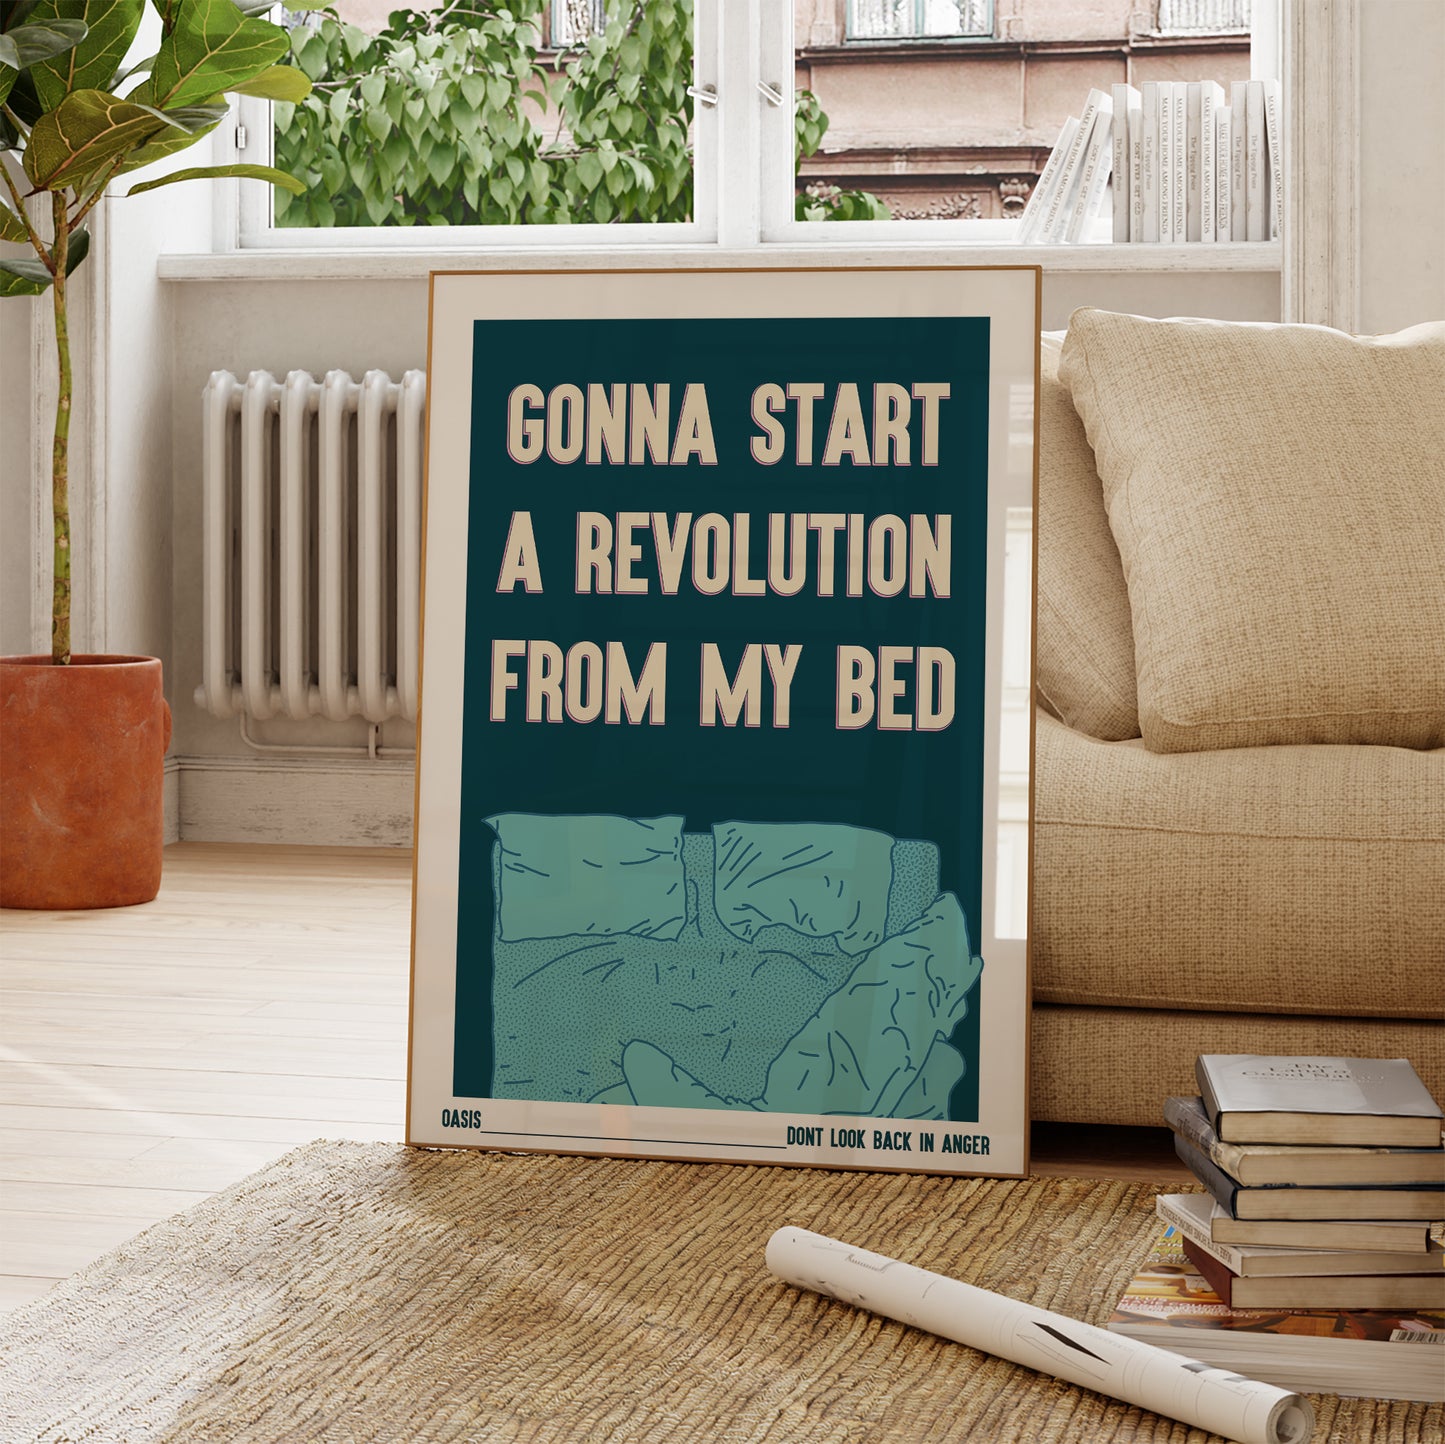 Gonna Start a Revolution From My Bed Print